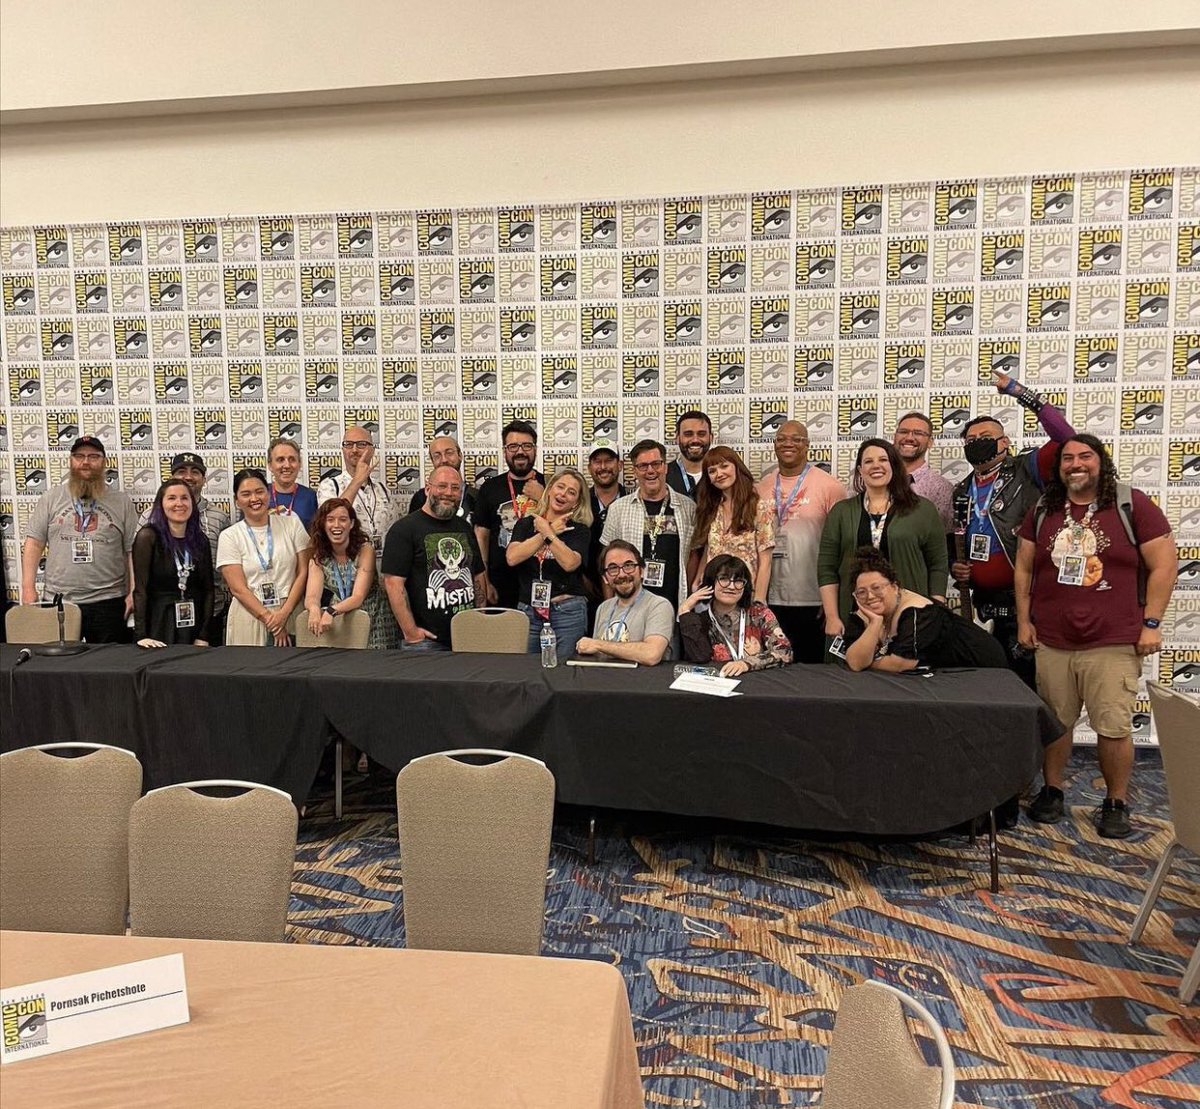 Thanks @CreatorsAssemb, it was an honor and privilege to share a table with @geauxta, @cherishchen and @davidbooher this weekend! #SDCC #RepresentationMatters #MakeComics 🗯